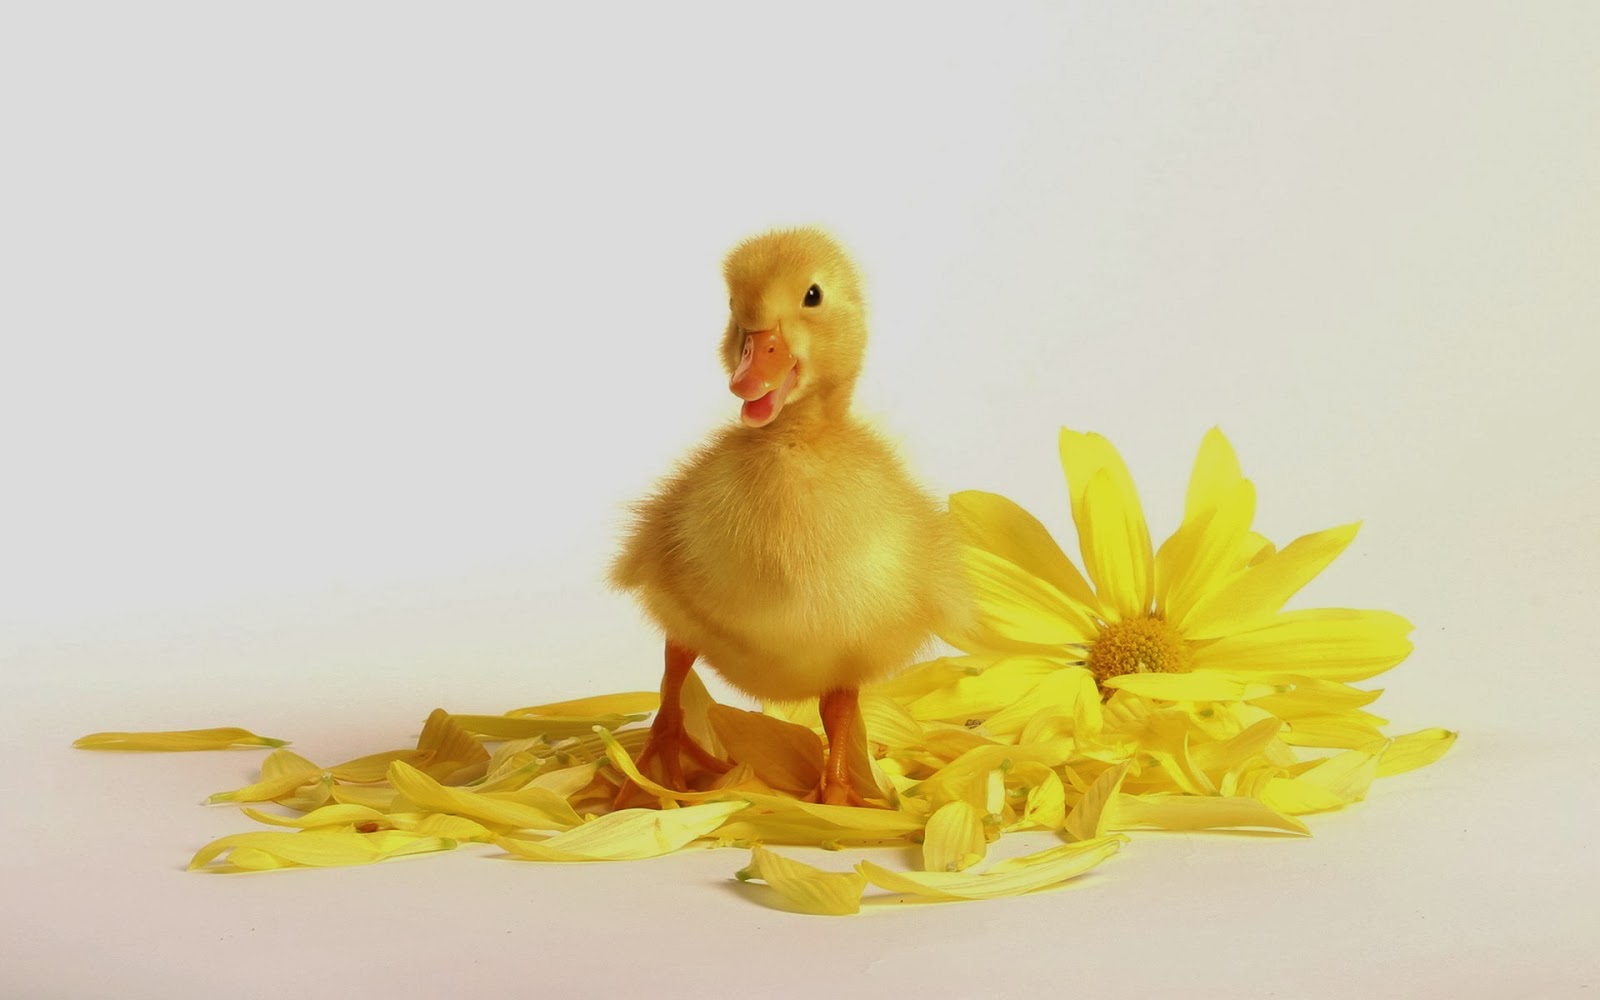  duck baby playing with yellow flower so cute picture of duck baby